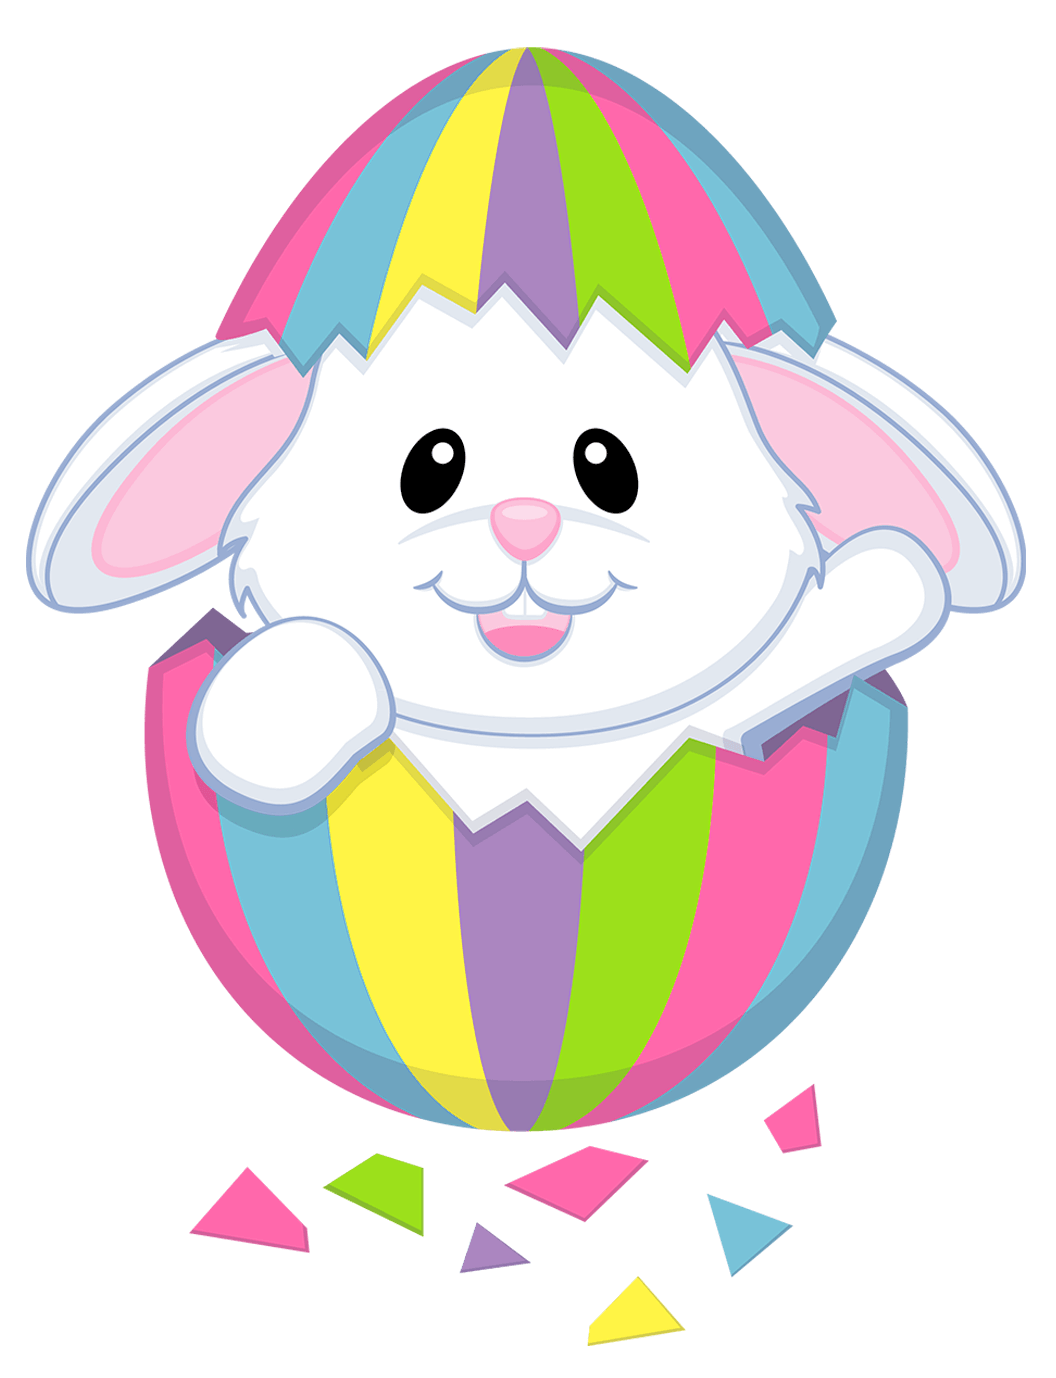 image of an easter bunny emerging from colorful egg